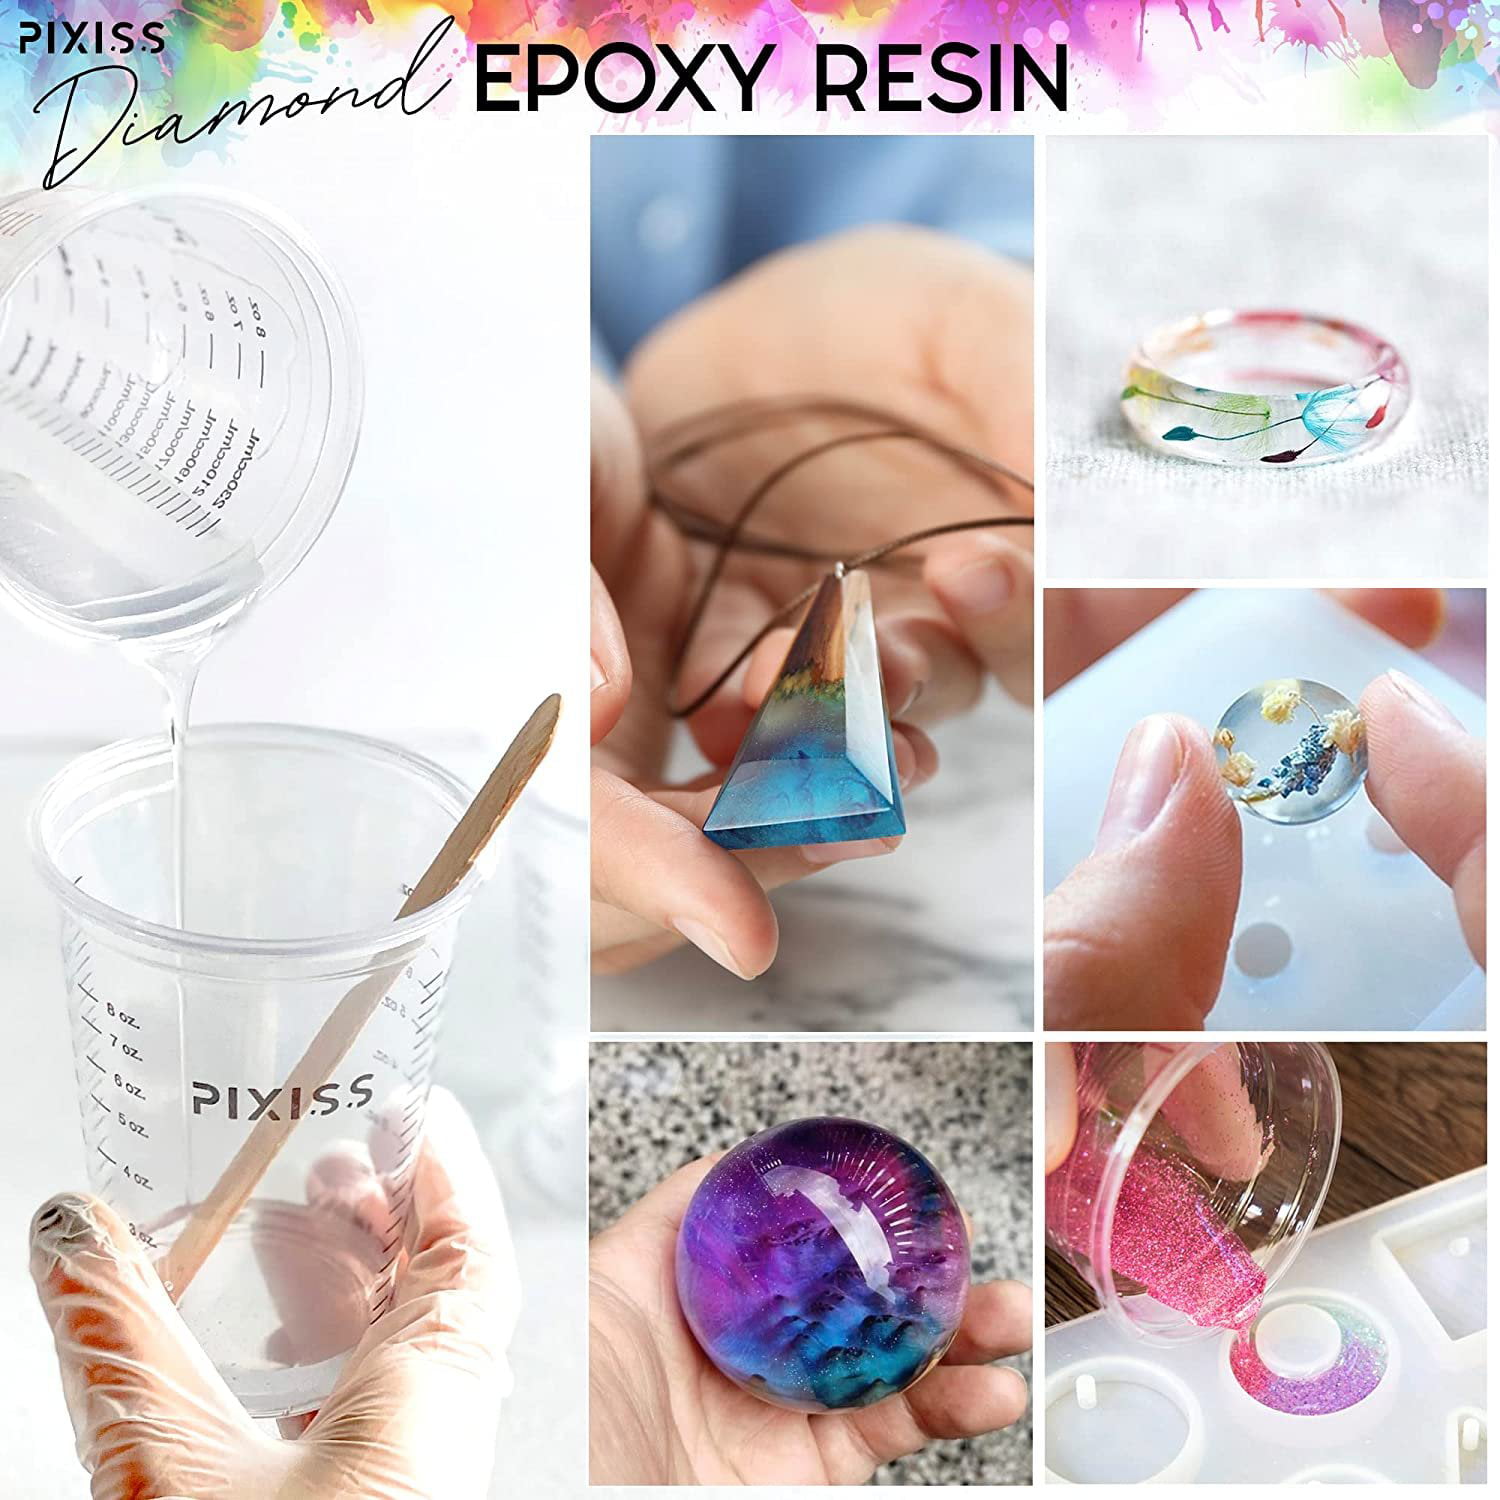 Epoxy Resin Crystal Clear Casting Resin for Epoxy and Resin Art Pixiss Brand Easy Mix 2 Gallon Kit Supplies for Tumblers, Jewelry Resin, Molds